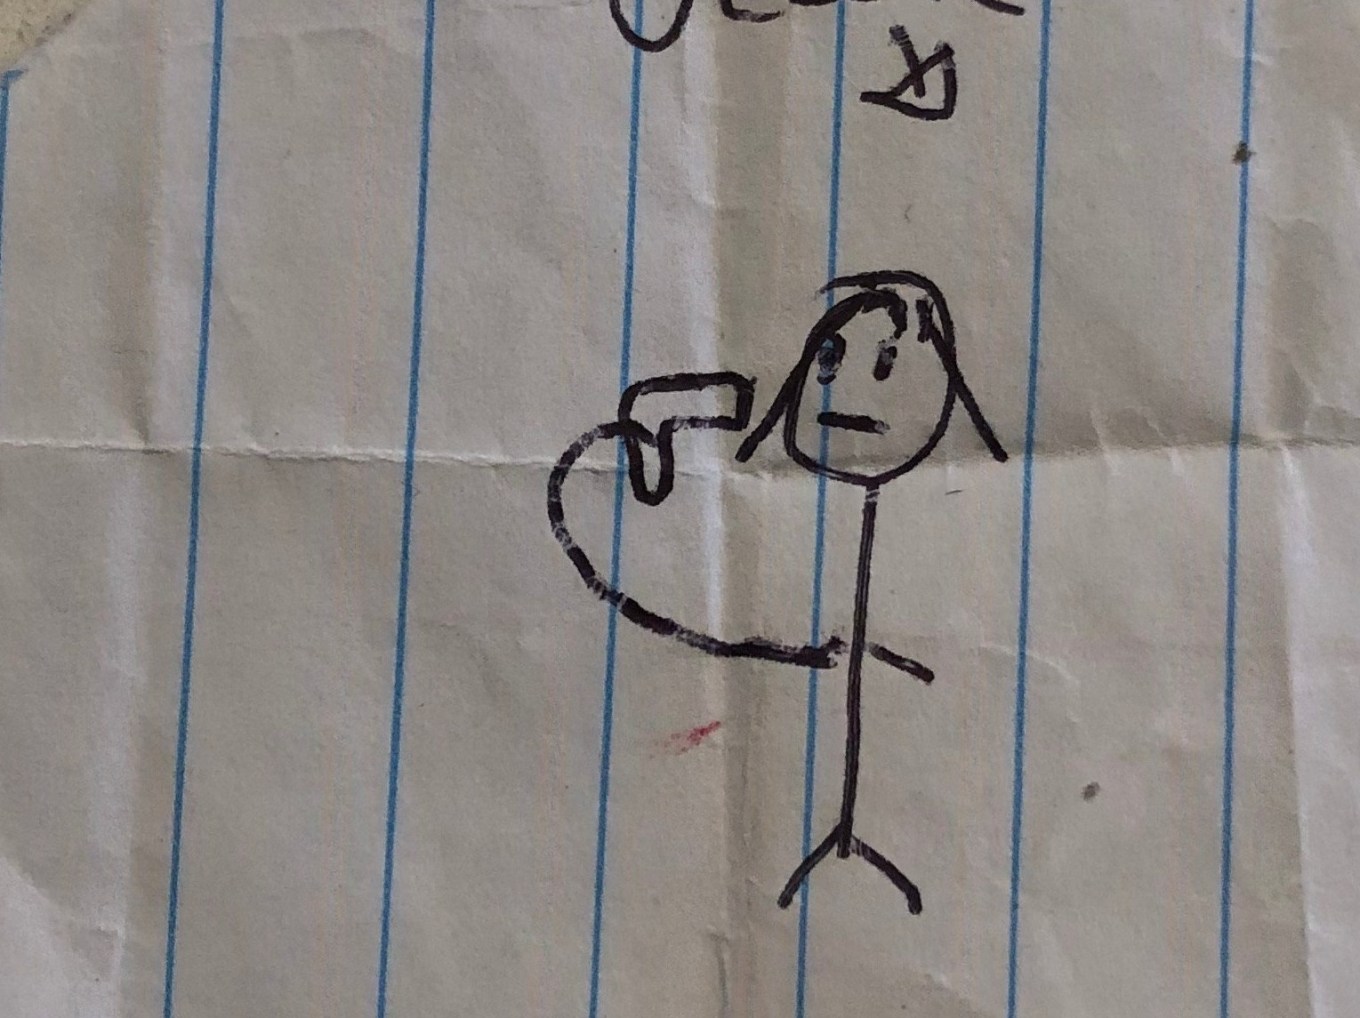 drawing depicts a stick figure holding a gun at his head